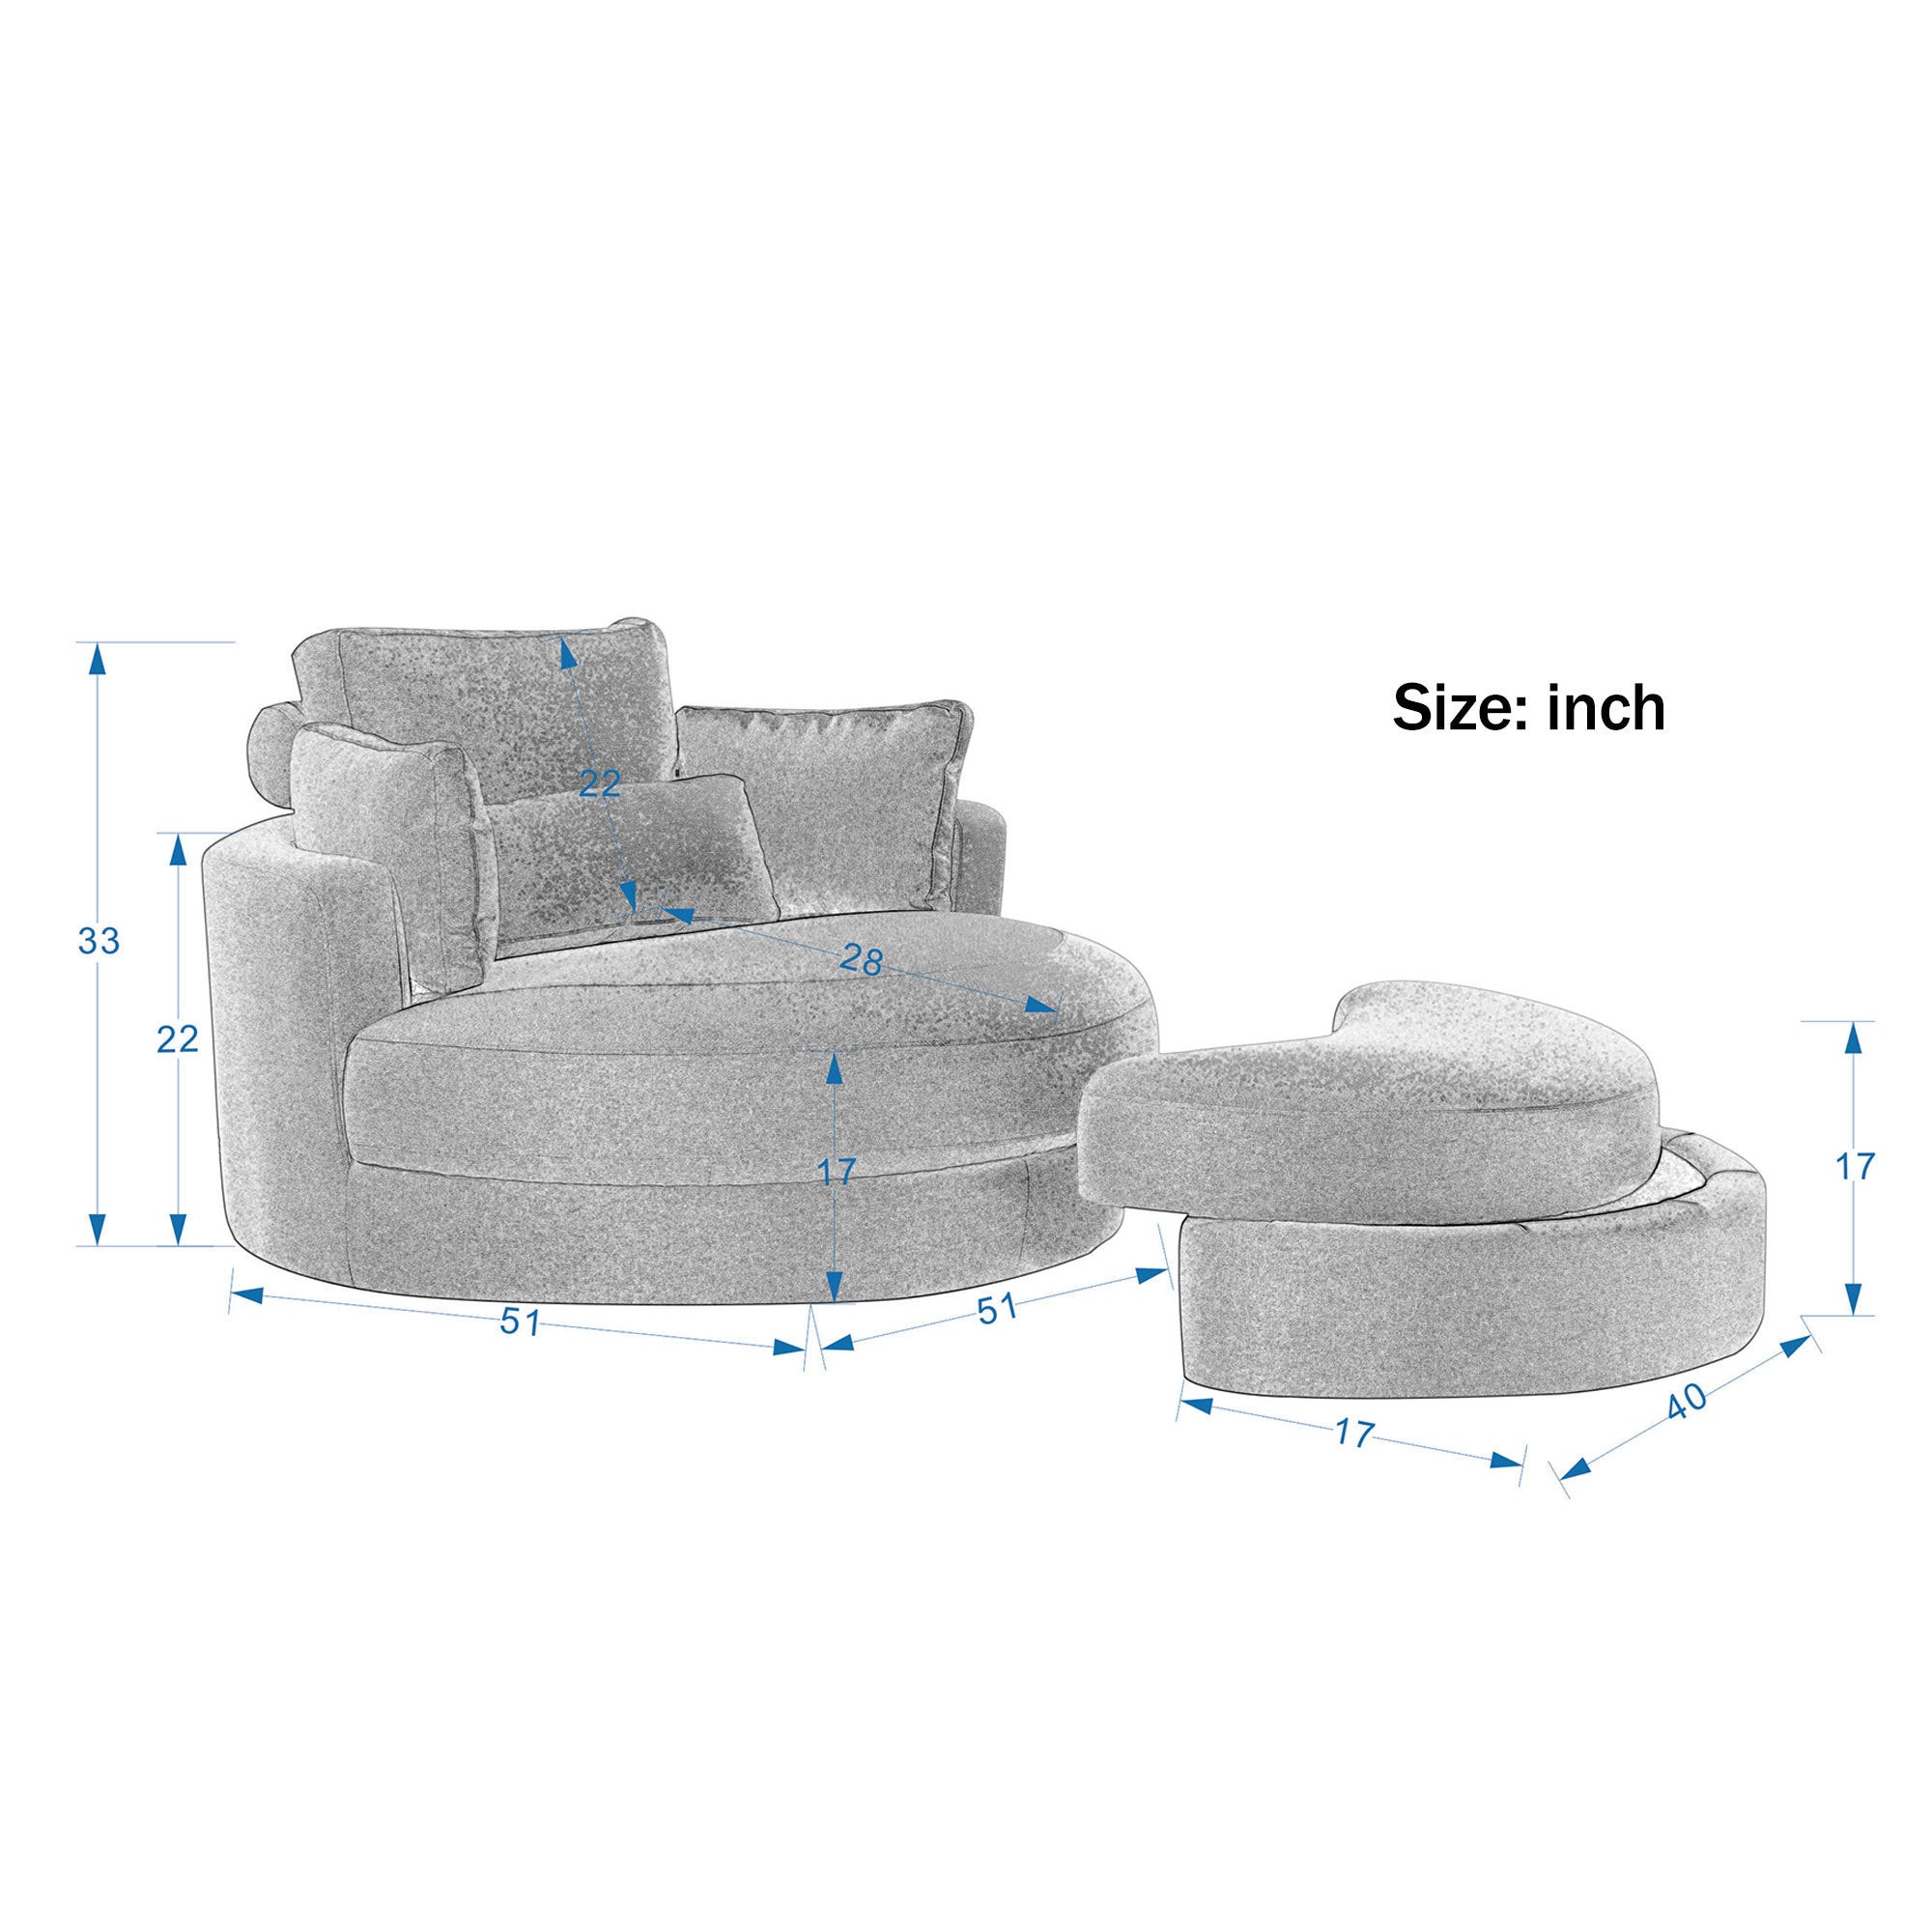 Linen Fabric Swivel Accent Barrel Big Round Lounge Sofa Chair with Storage Ottoman and Pillows (Dark Gray)